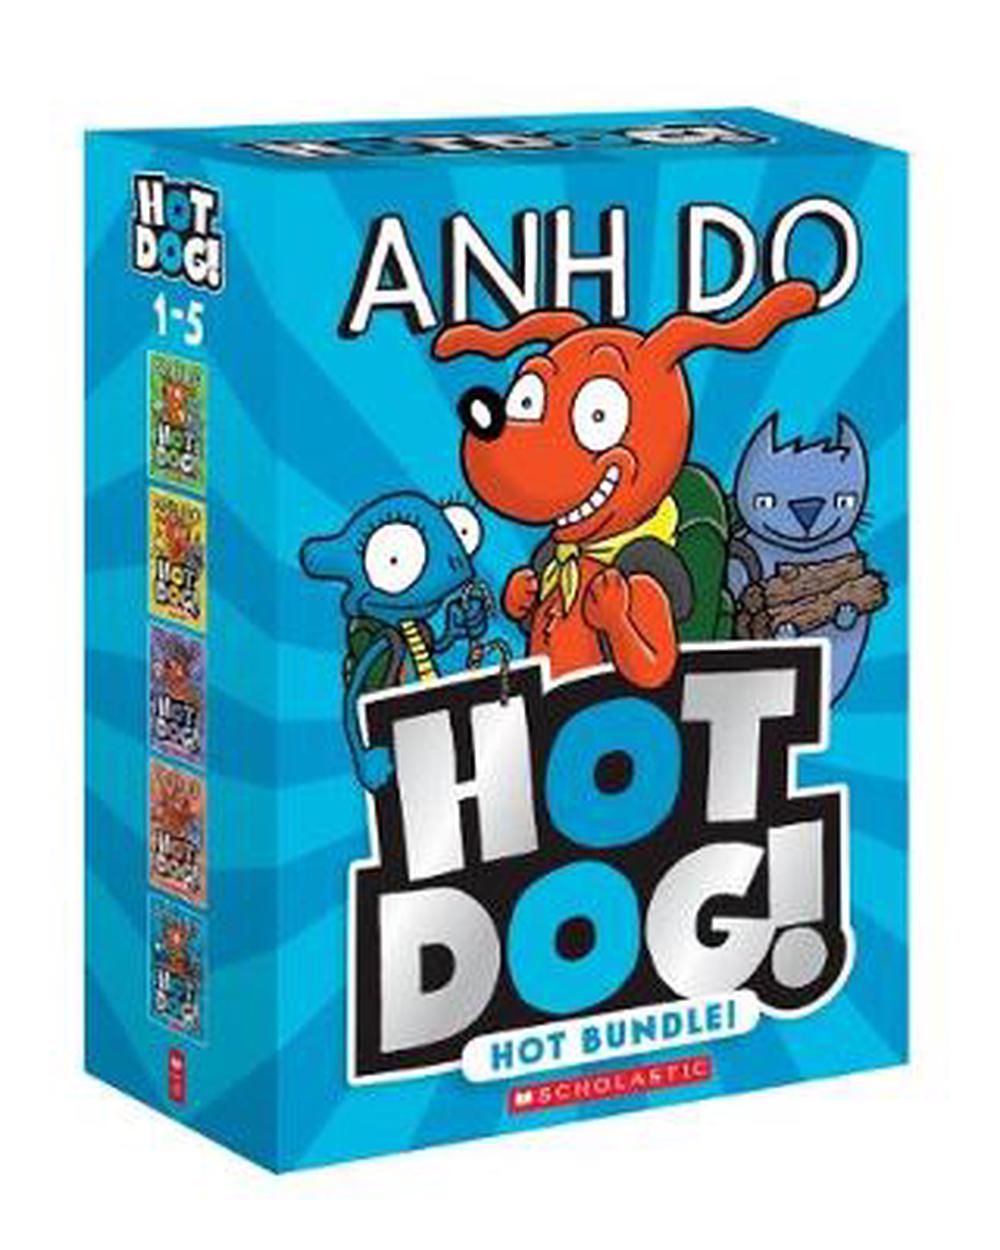 Hotdog 1-5: Hot Bundle! by Anh Do Paperback Book Free Shipping ...